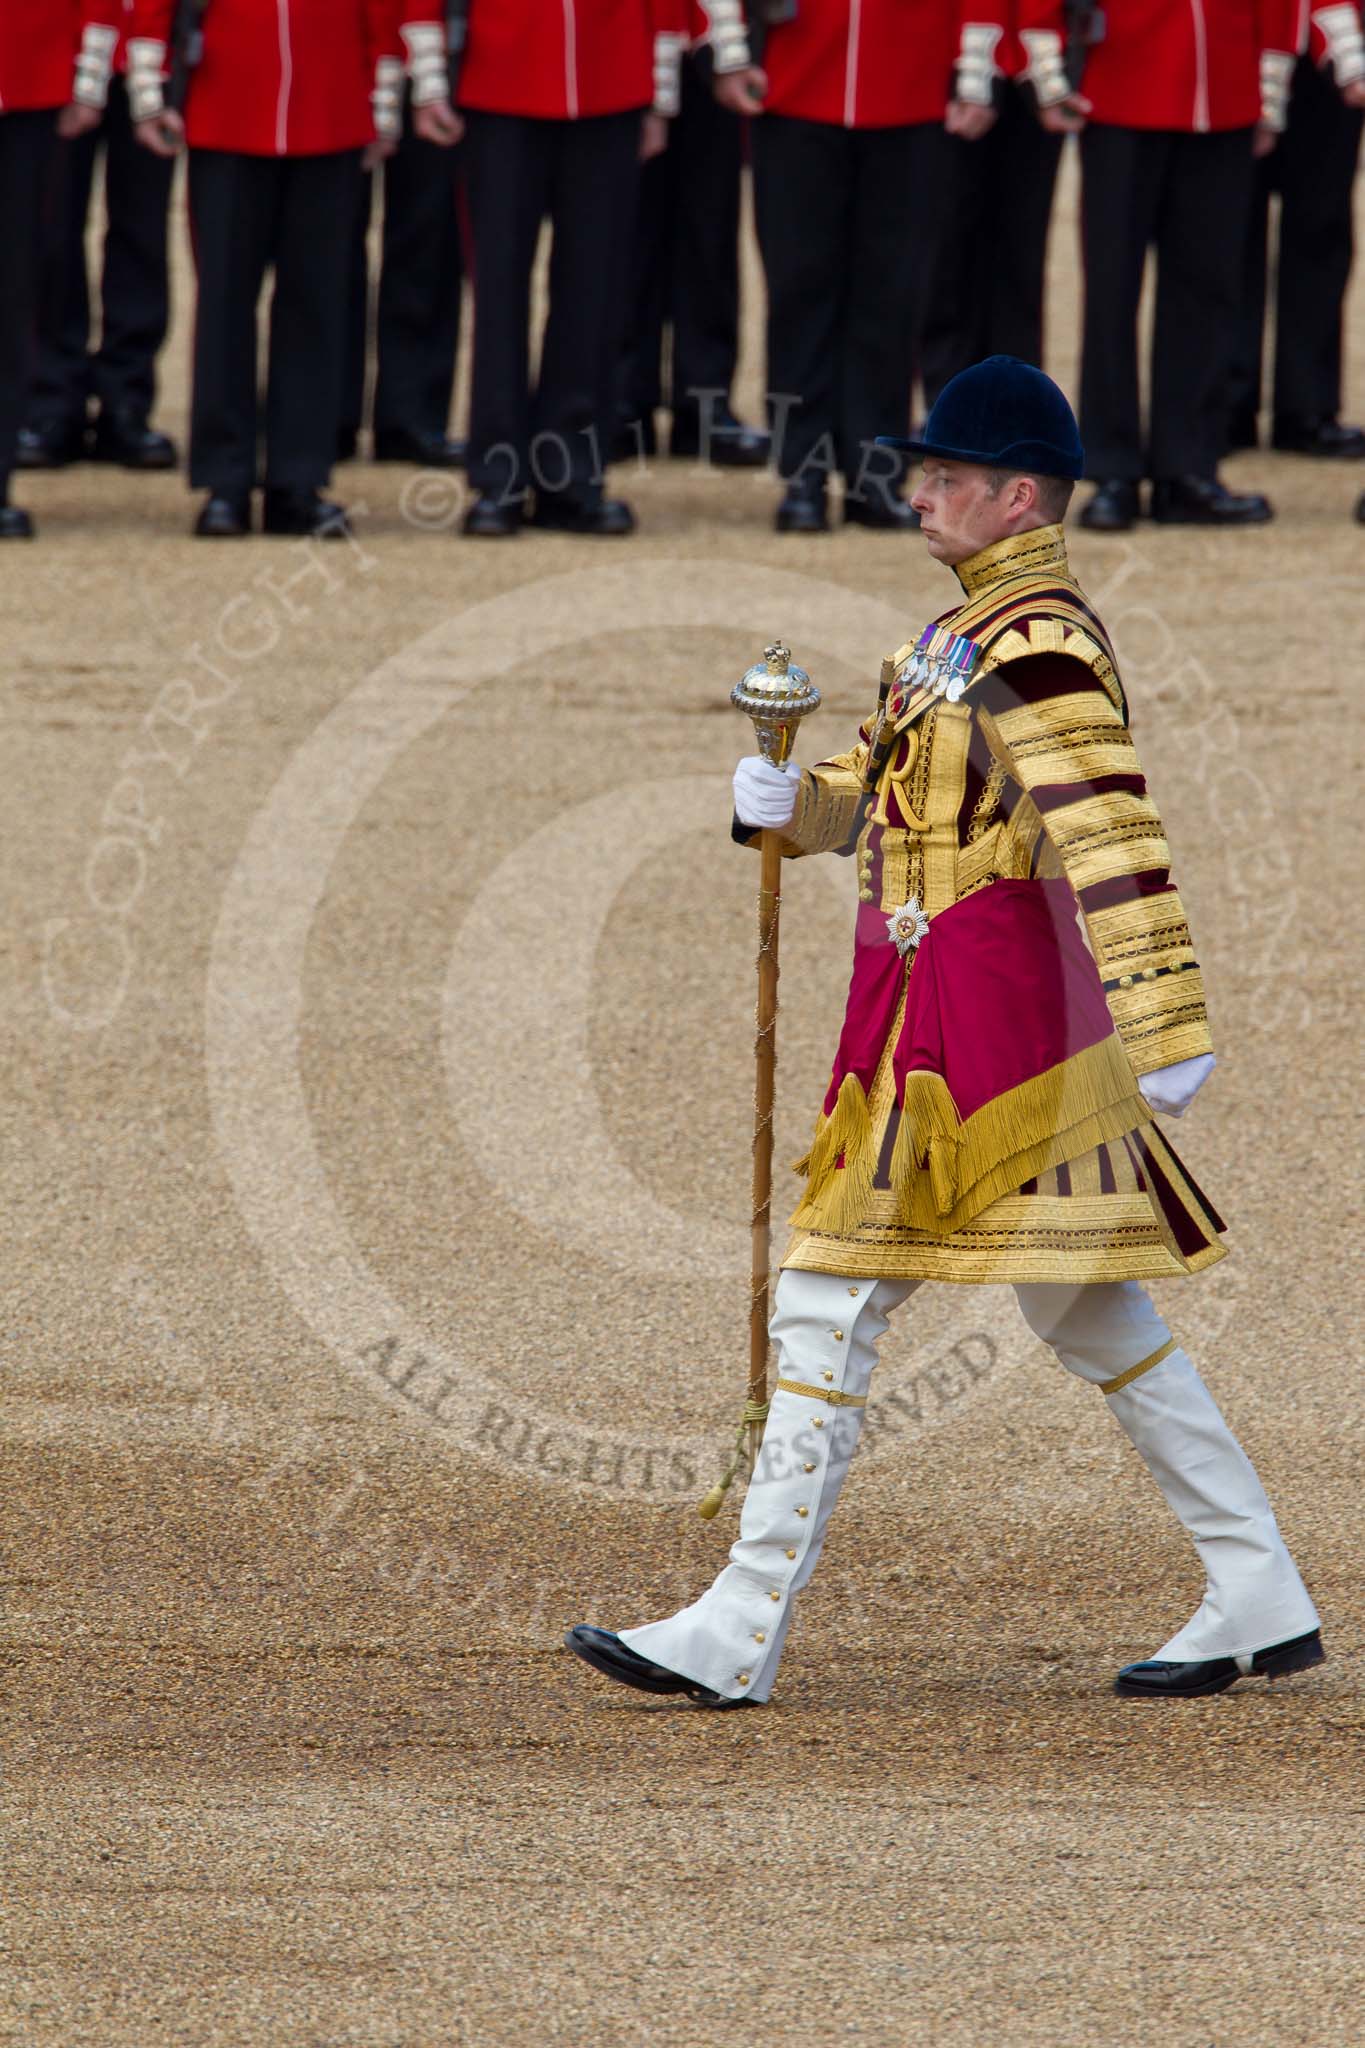 The Colonel's Review 2011: Drum Major Scott Fitzgerald, Coldstream Guards, marching in front of 'his' Band of the Coldstream Guards at The Colonel's Review..
Horse Guards Parade, Westminster,
London SW1,

United Kingdom,
on 04 June 2011 at 11:11, image #116